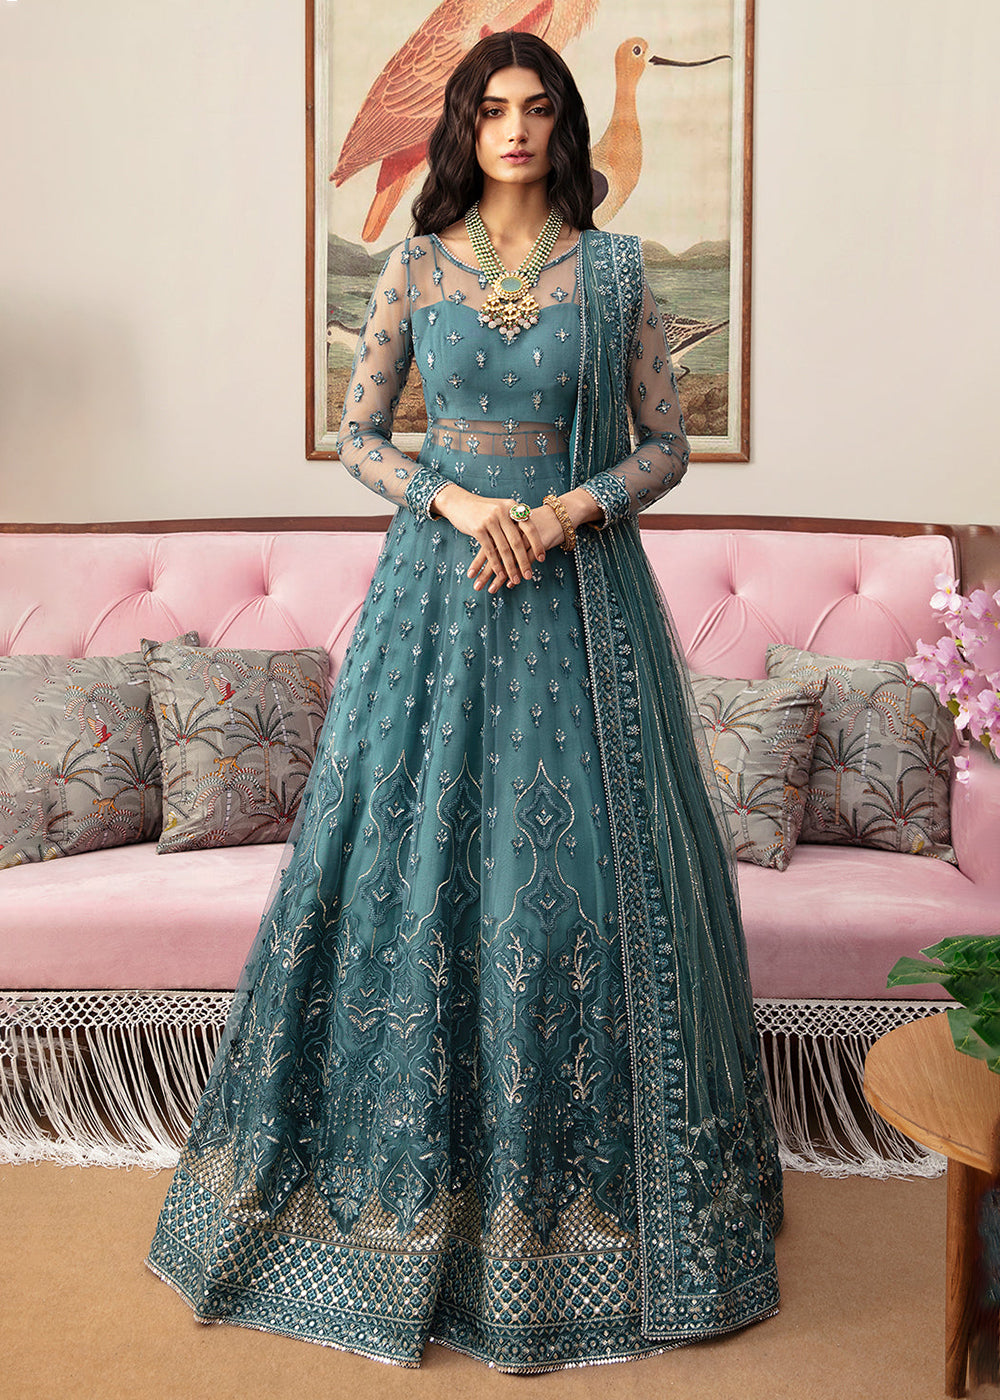 Buy Now The Whispers of Grandeur Luxury Formals '24 by Ayzel | LOBELIA Online at Empress Online in USA, UK, Canada & Worldwide at Empress Clothing.